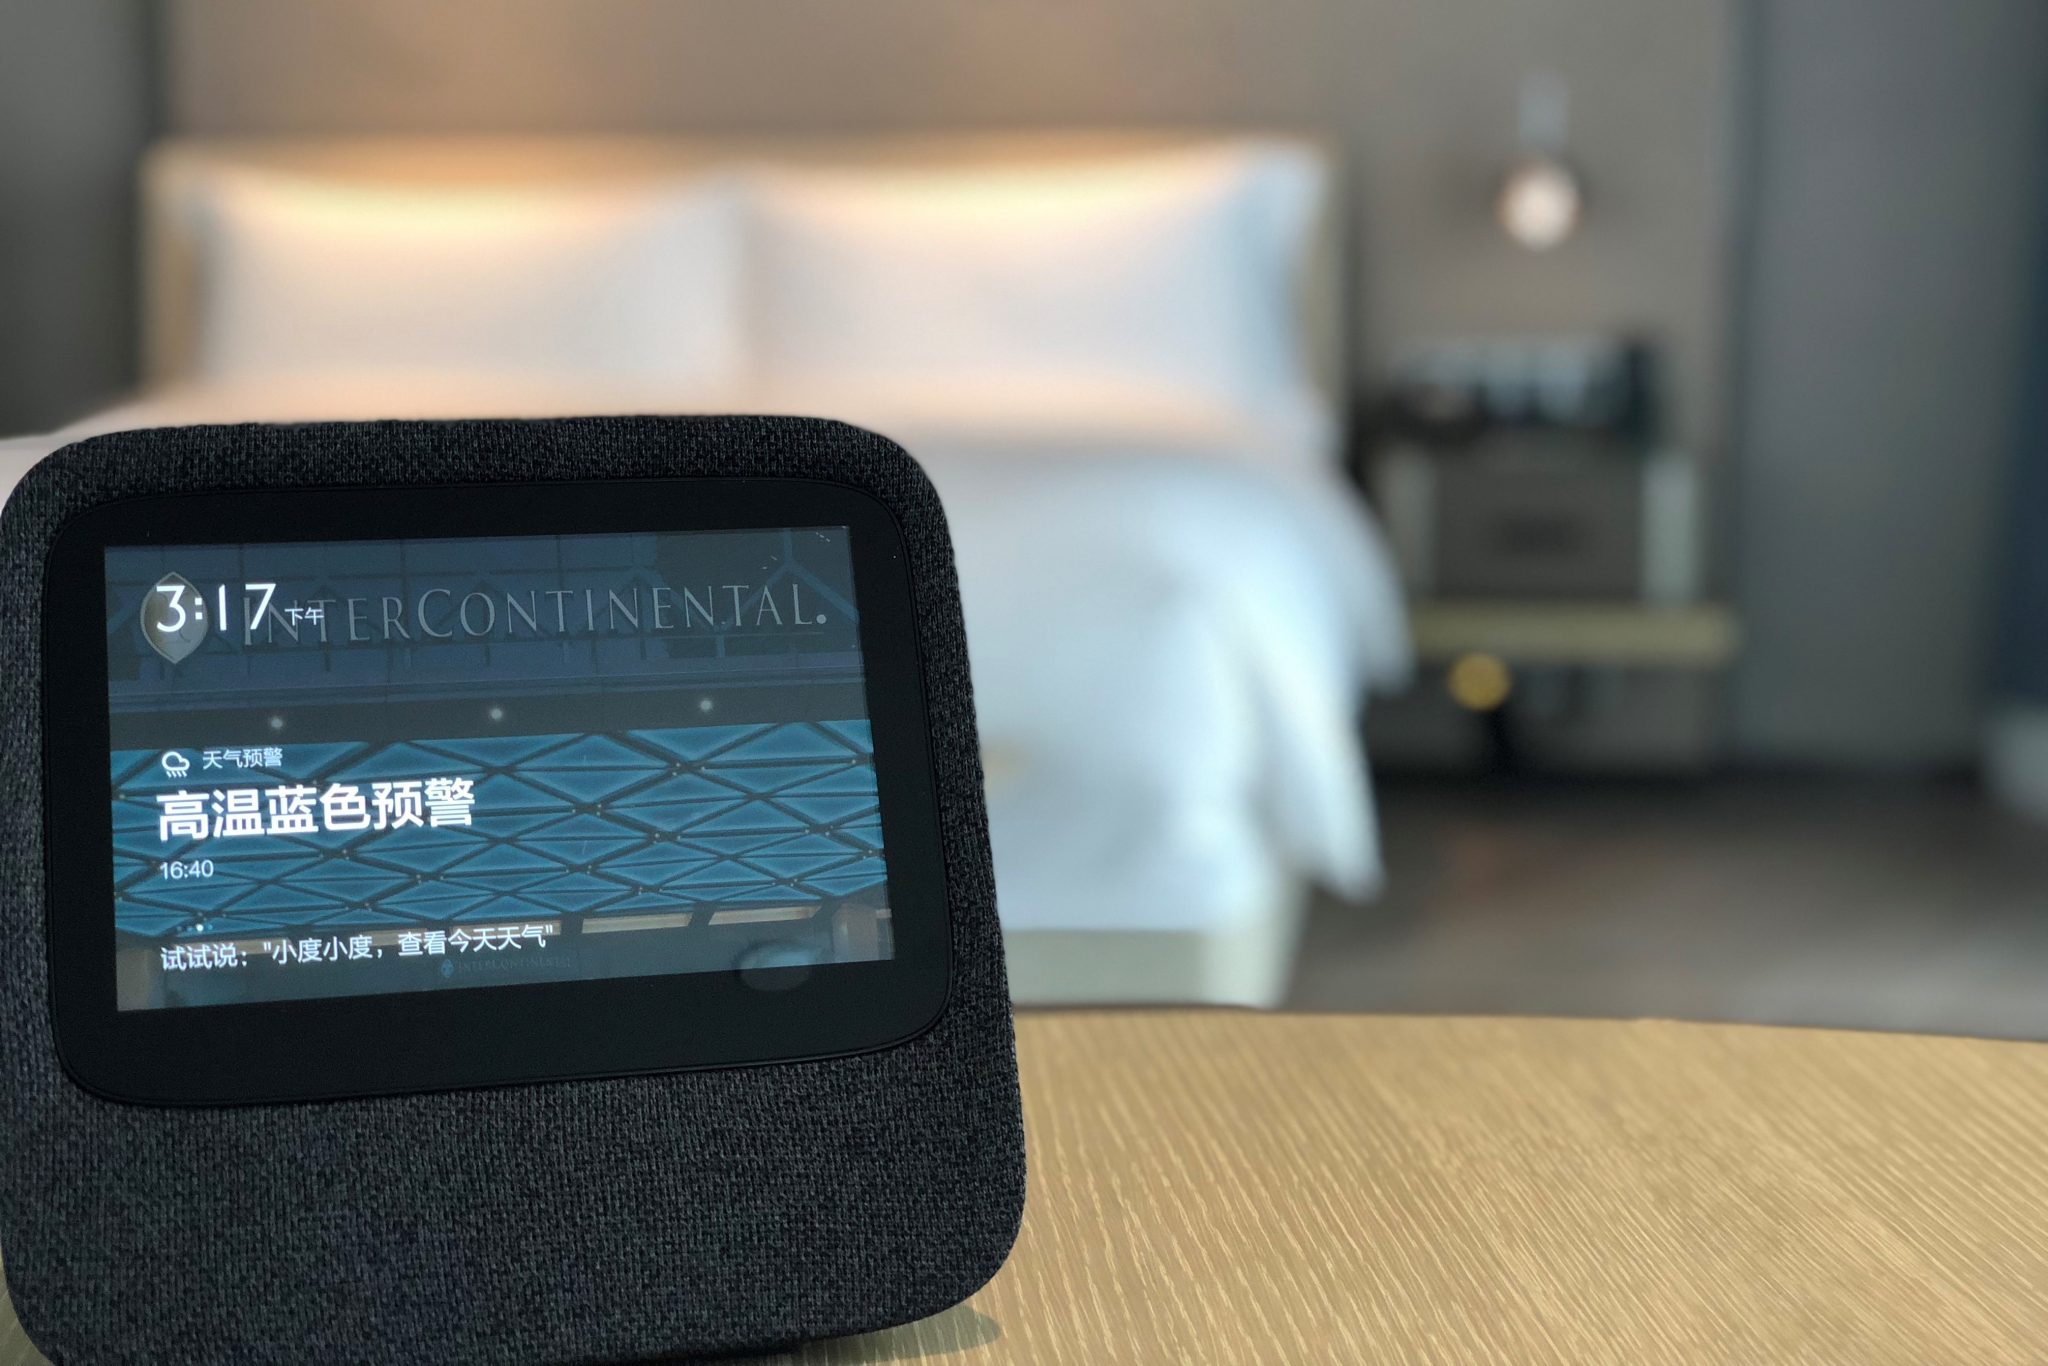 InterContinental has introduced Smart Rooms in hotels in Beijing and Guangzhou, allowing the room to be controlled through voice commands.